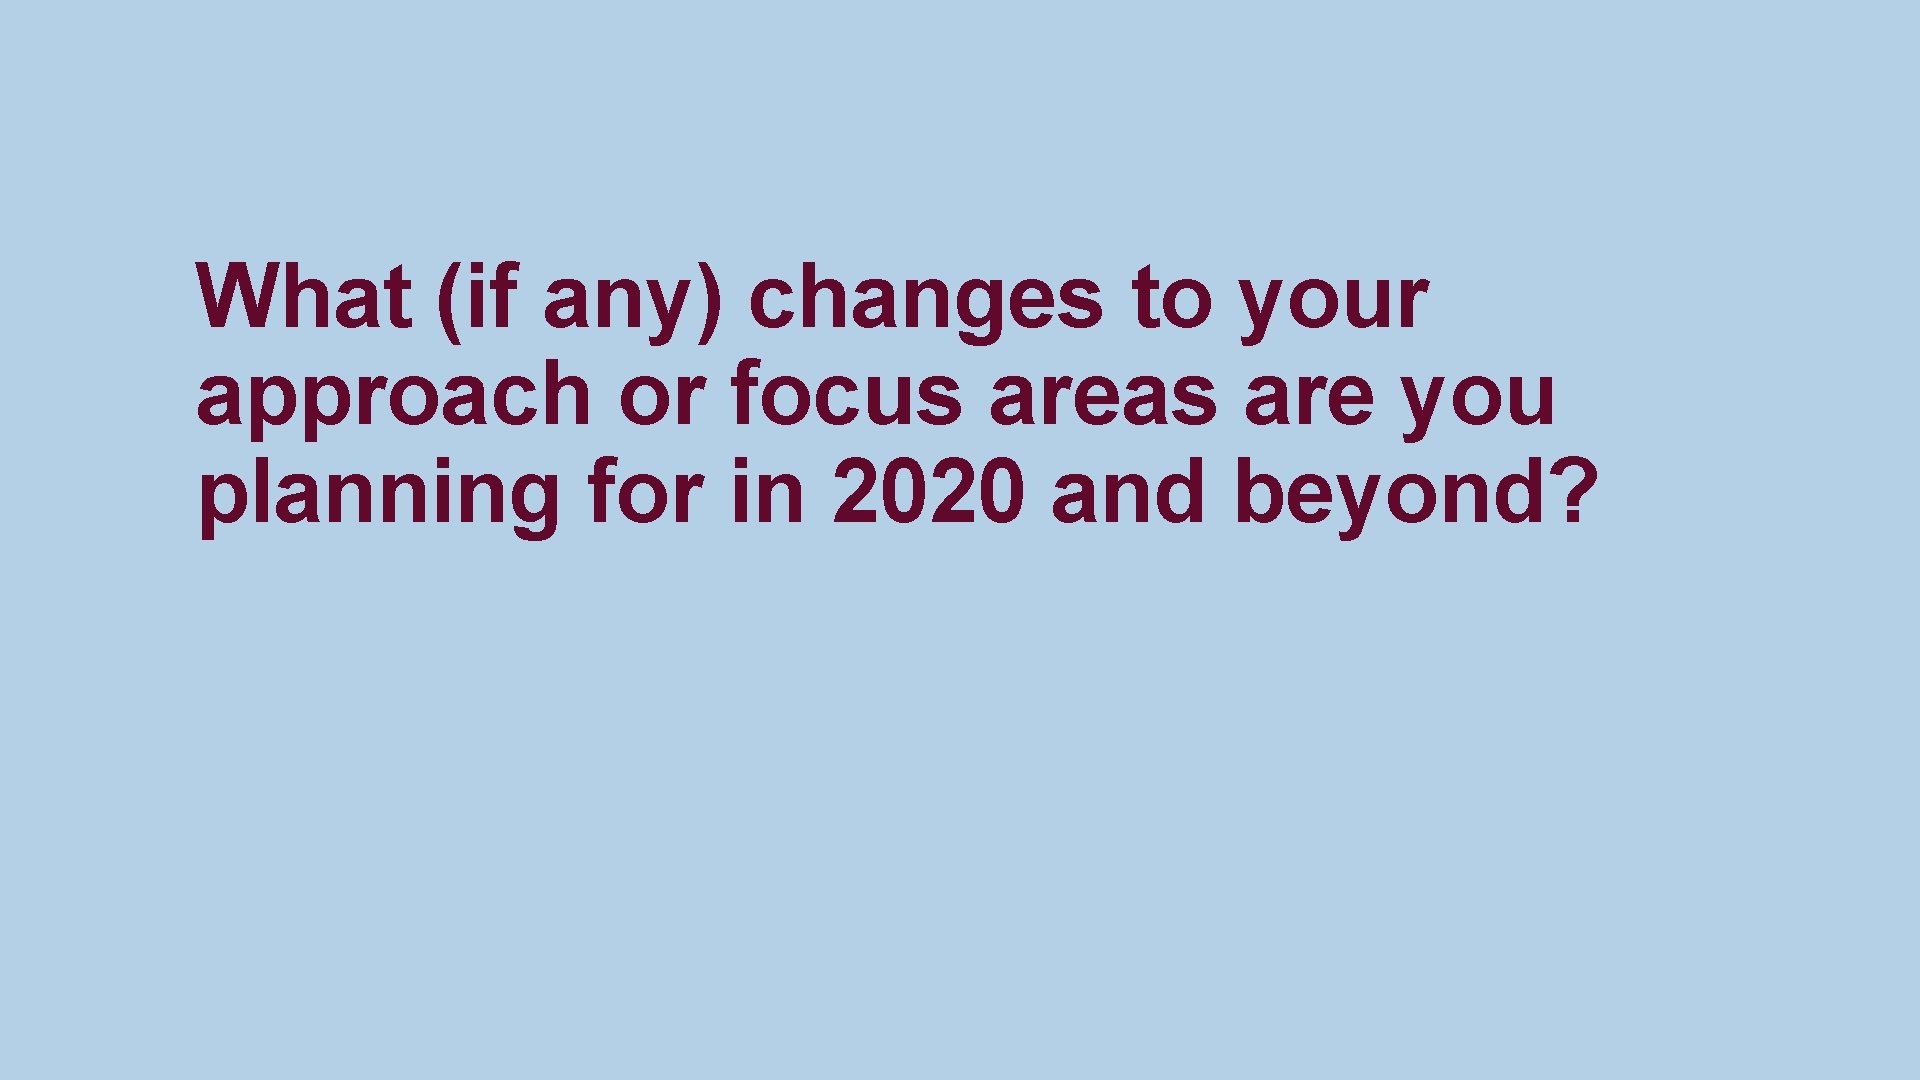 What (if any) changes to your approach or focus areas are you planning for